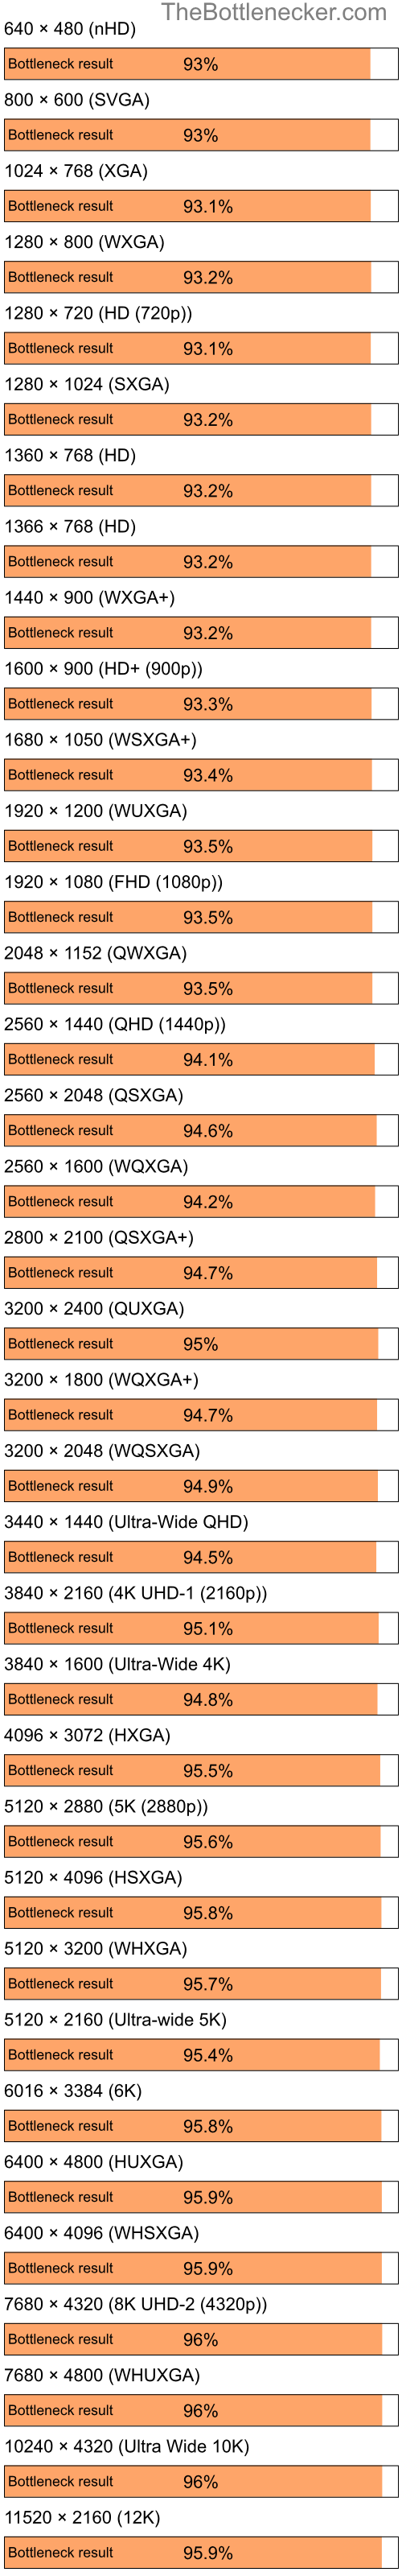 Bottleneck results by resolution for Intel Celeron and AMD Radeon 9250 in Graphic Card Intense Tasks